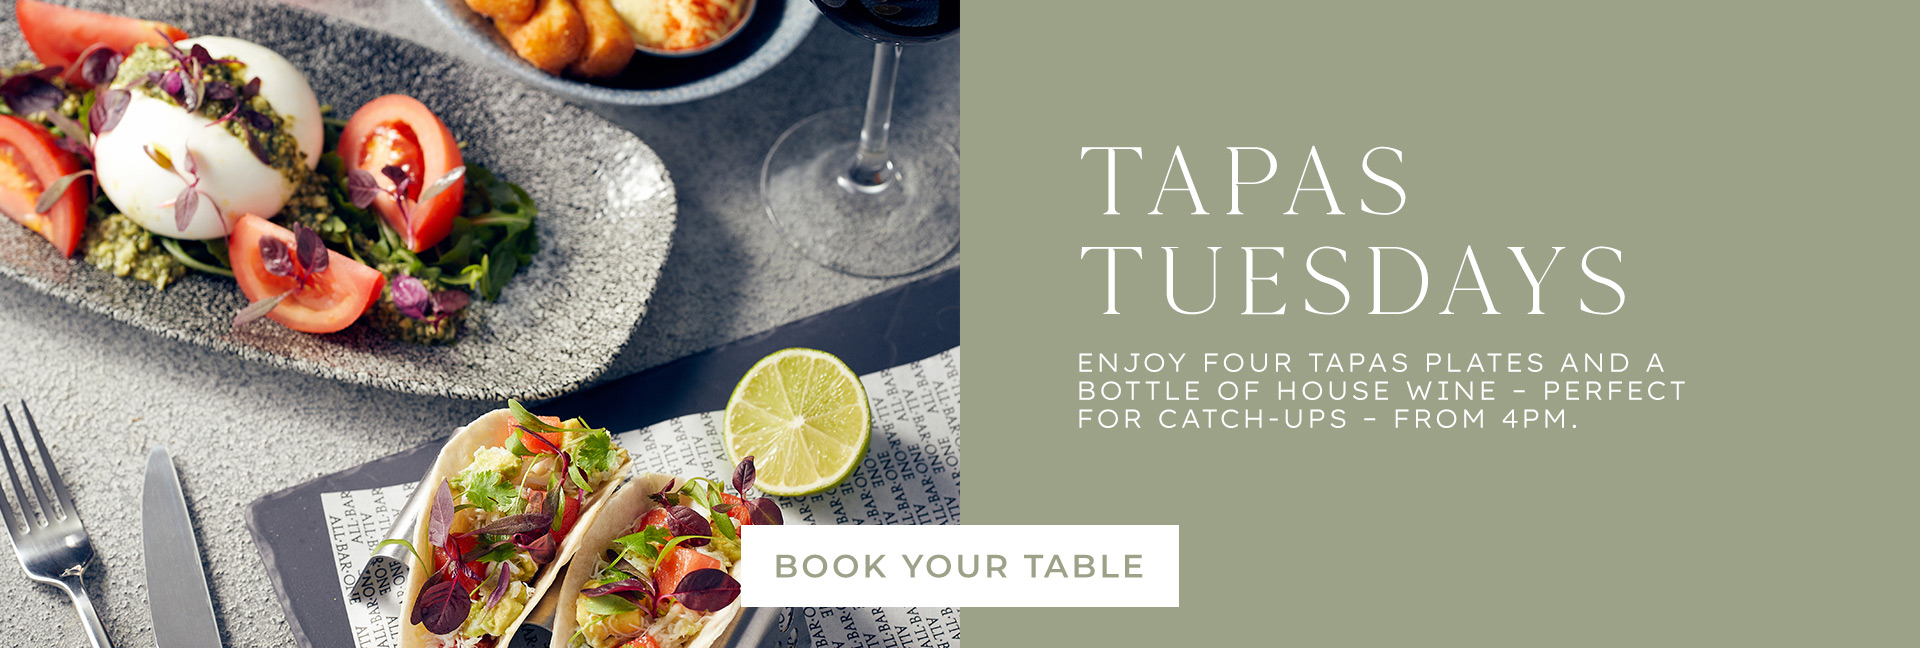 Tapas Tuesday at All Bar One Worcester - Book now